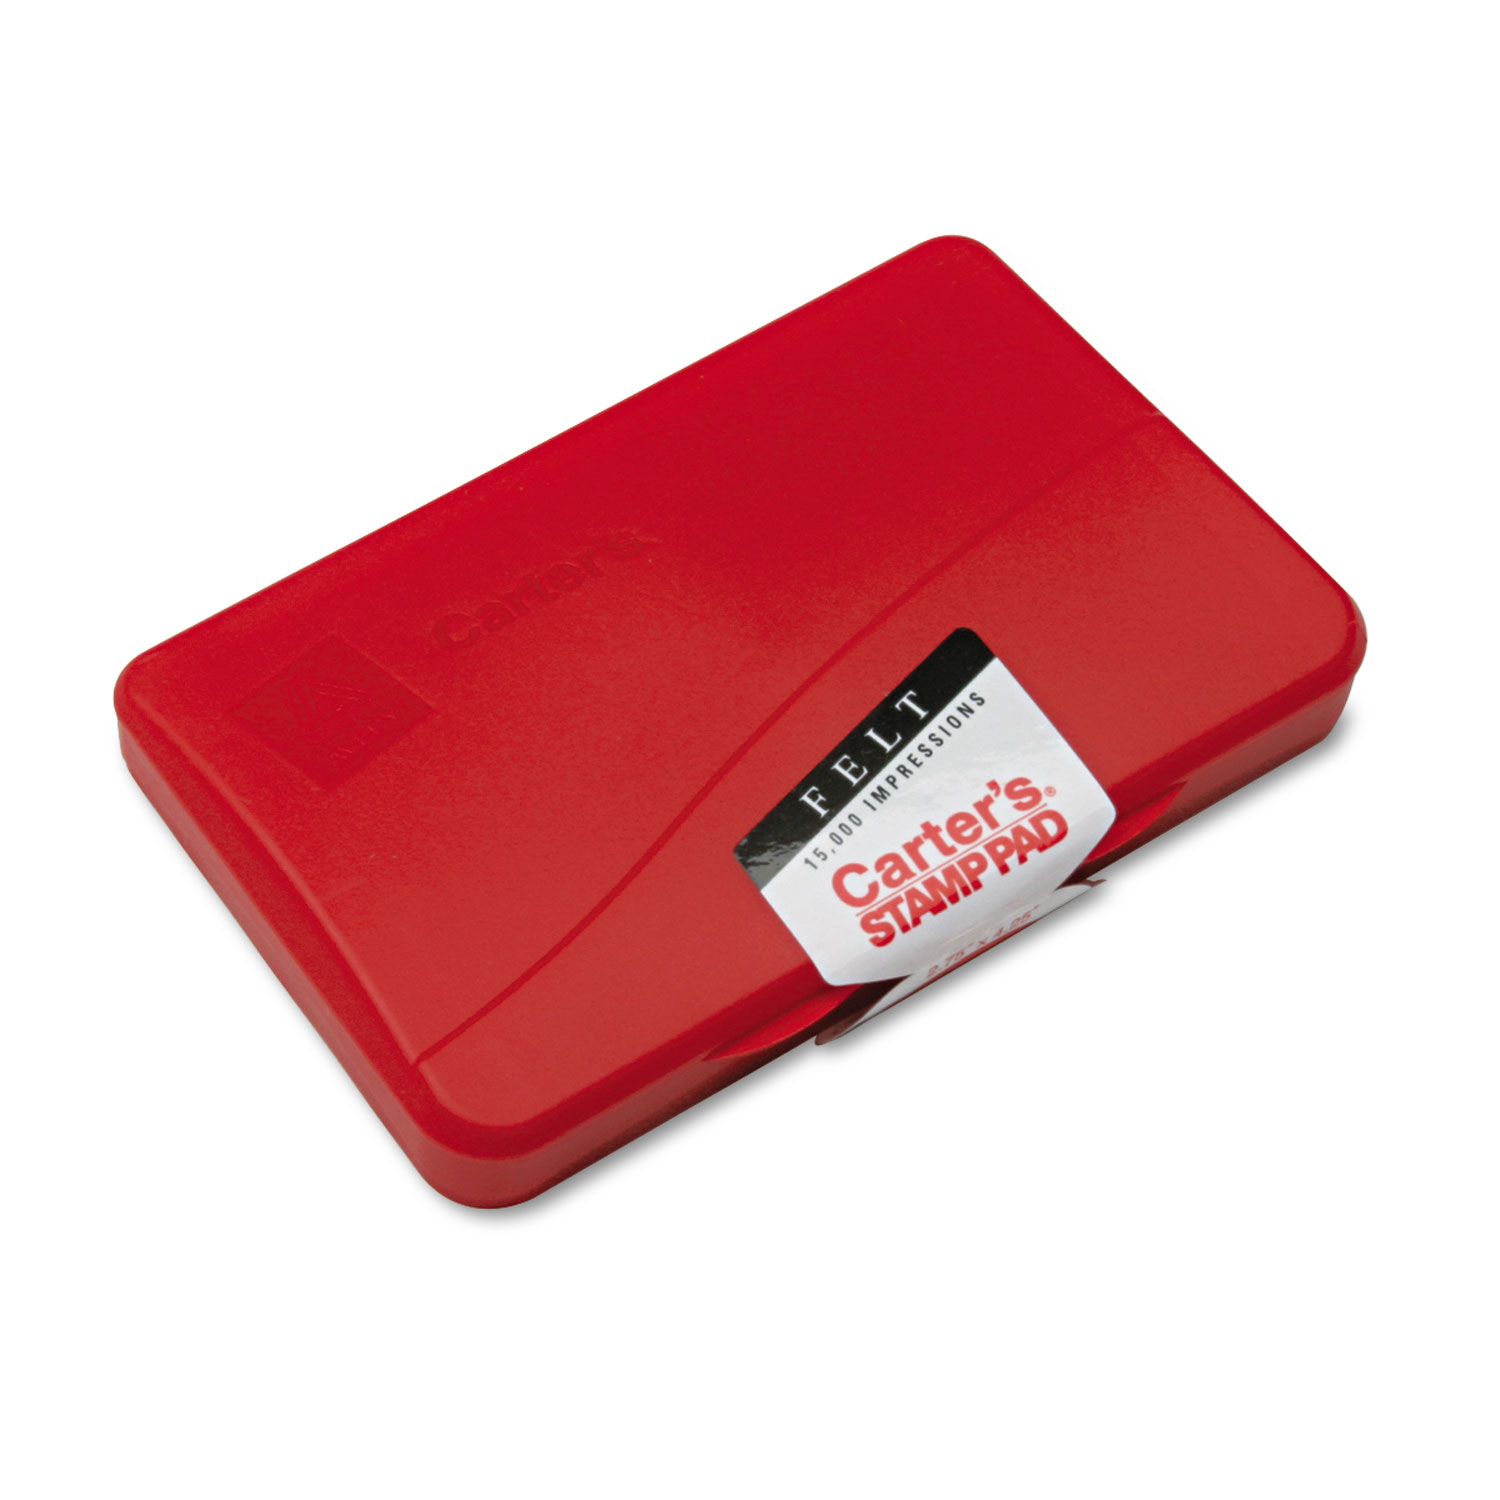  Carter's 21071 Felt Stamp Pad, 4 1/4 x 2 3/4, Red (AVE21071) 